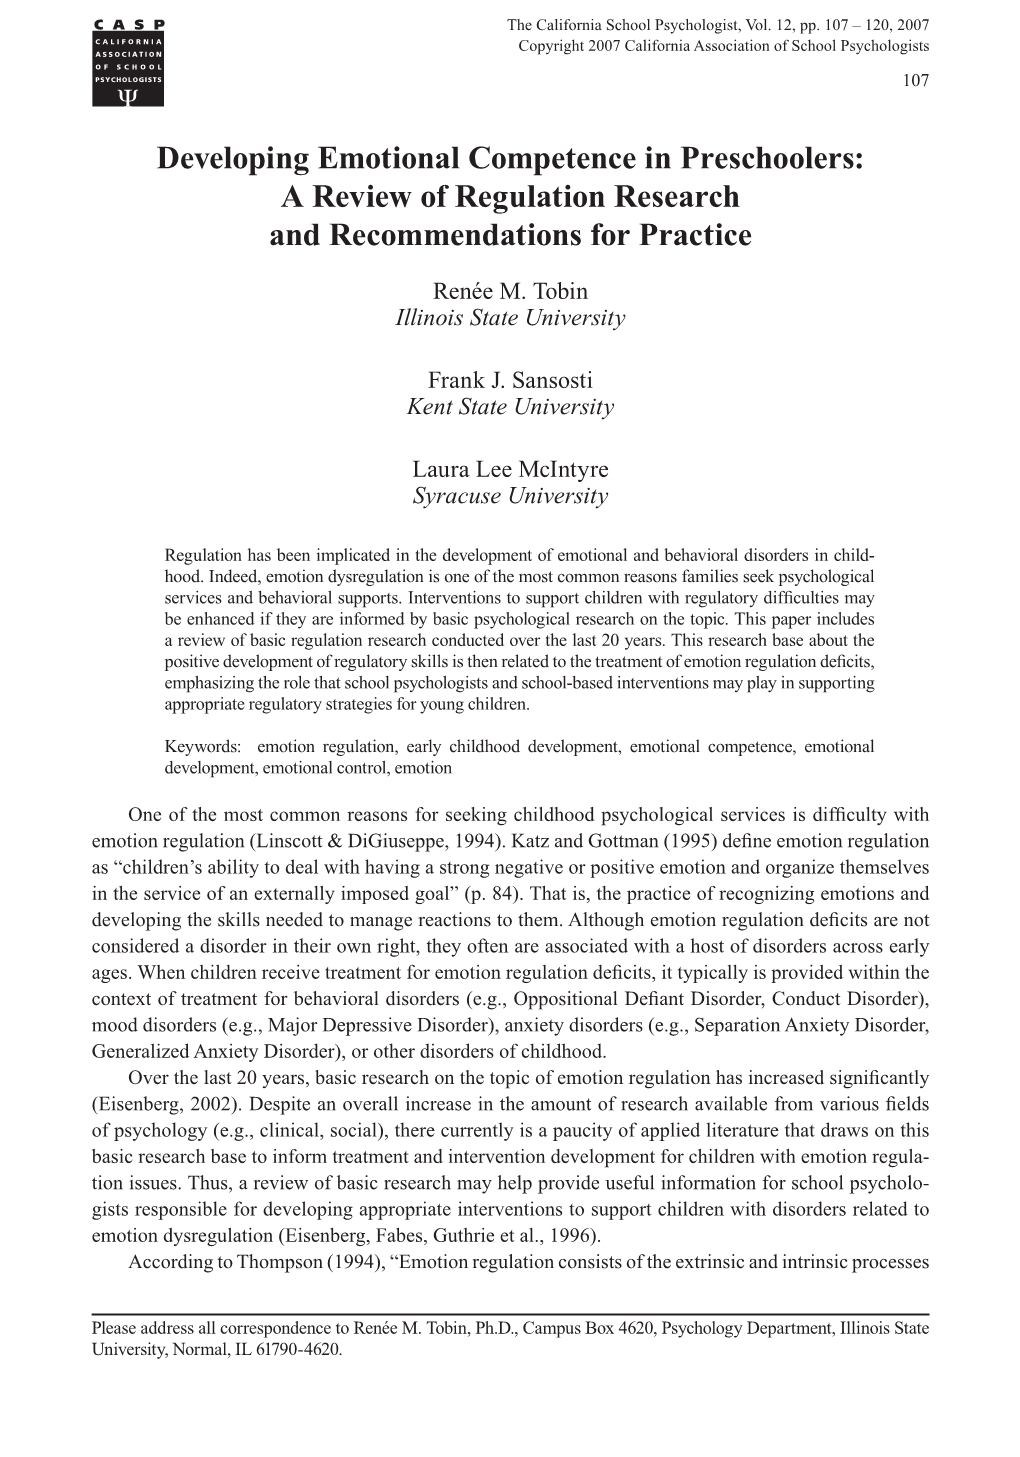 Developing Emotional Competence in Preschoolers: a Review of Regulation Research and Recommendations for Practice